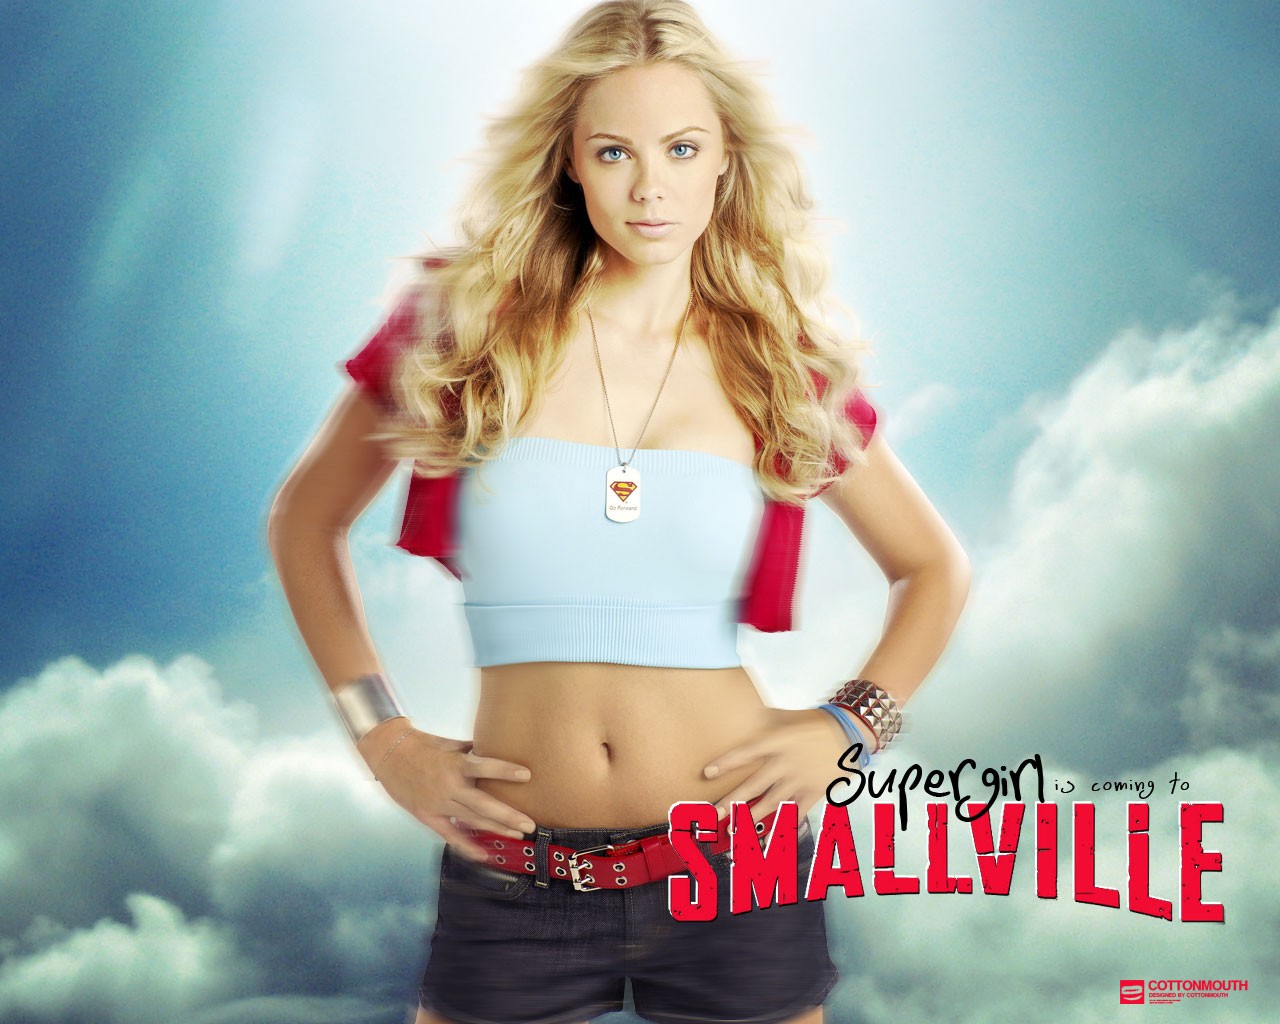 People 1280x1024 Smallville Supergirl TV series promotional Laura Vandervoort Canadian Canadian women women actress blonde long hair top belly slim body bare midriff standing looking at viewer superheroines necklace bracelets